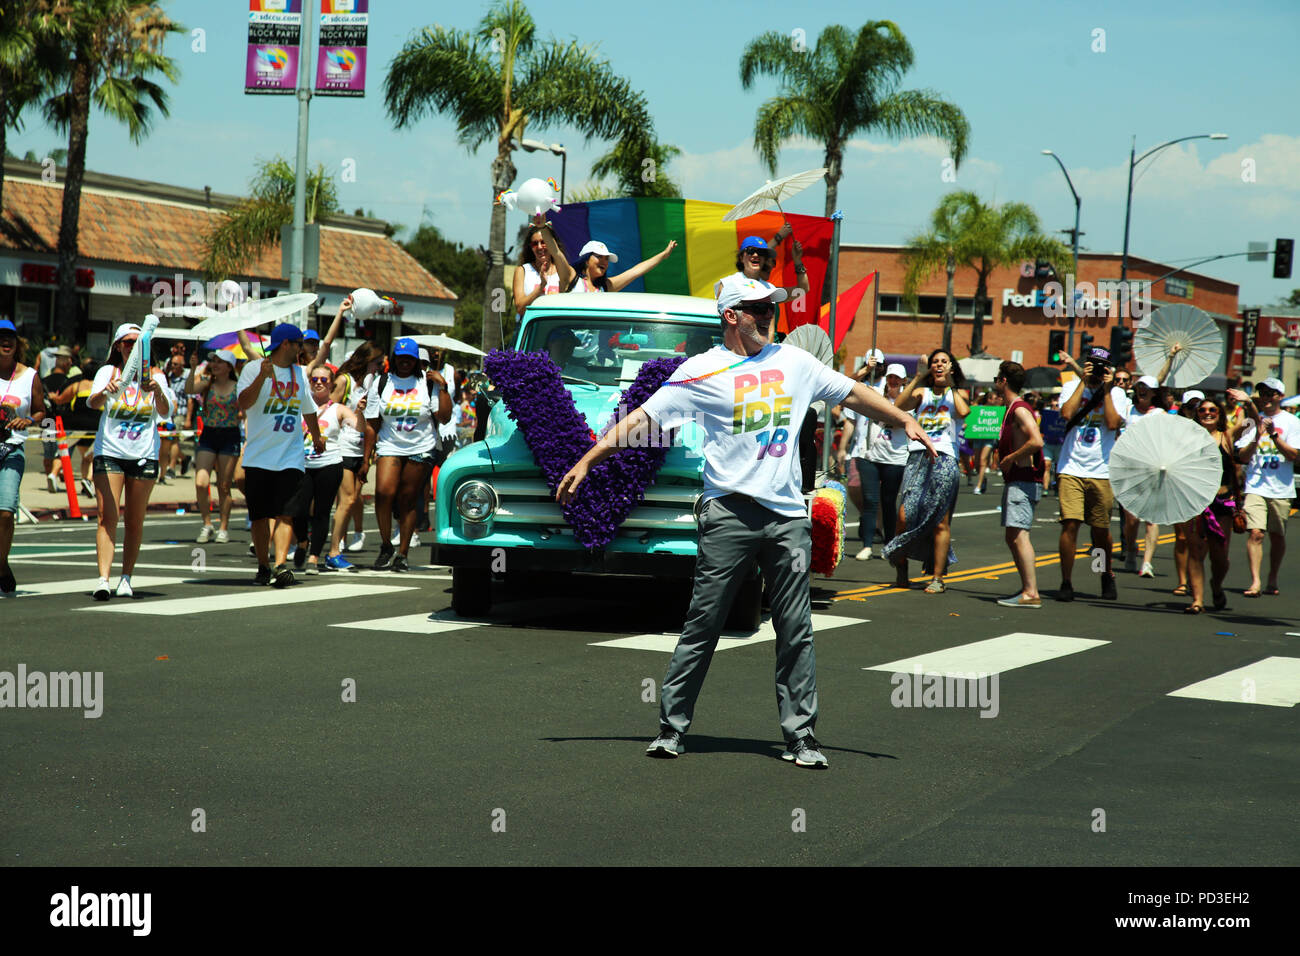 San Diego, California, USA. 14th July, 2018. The annual San Diego Pride Parade is the largest single-day civic event in the region and is among the largest Prides in the United States, attracting over 200,000 people. Credit: Katrina Kochneva/ZUMA Wire/Alamy Live News Stock Photo